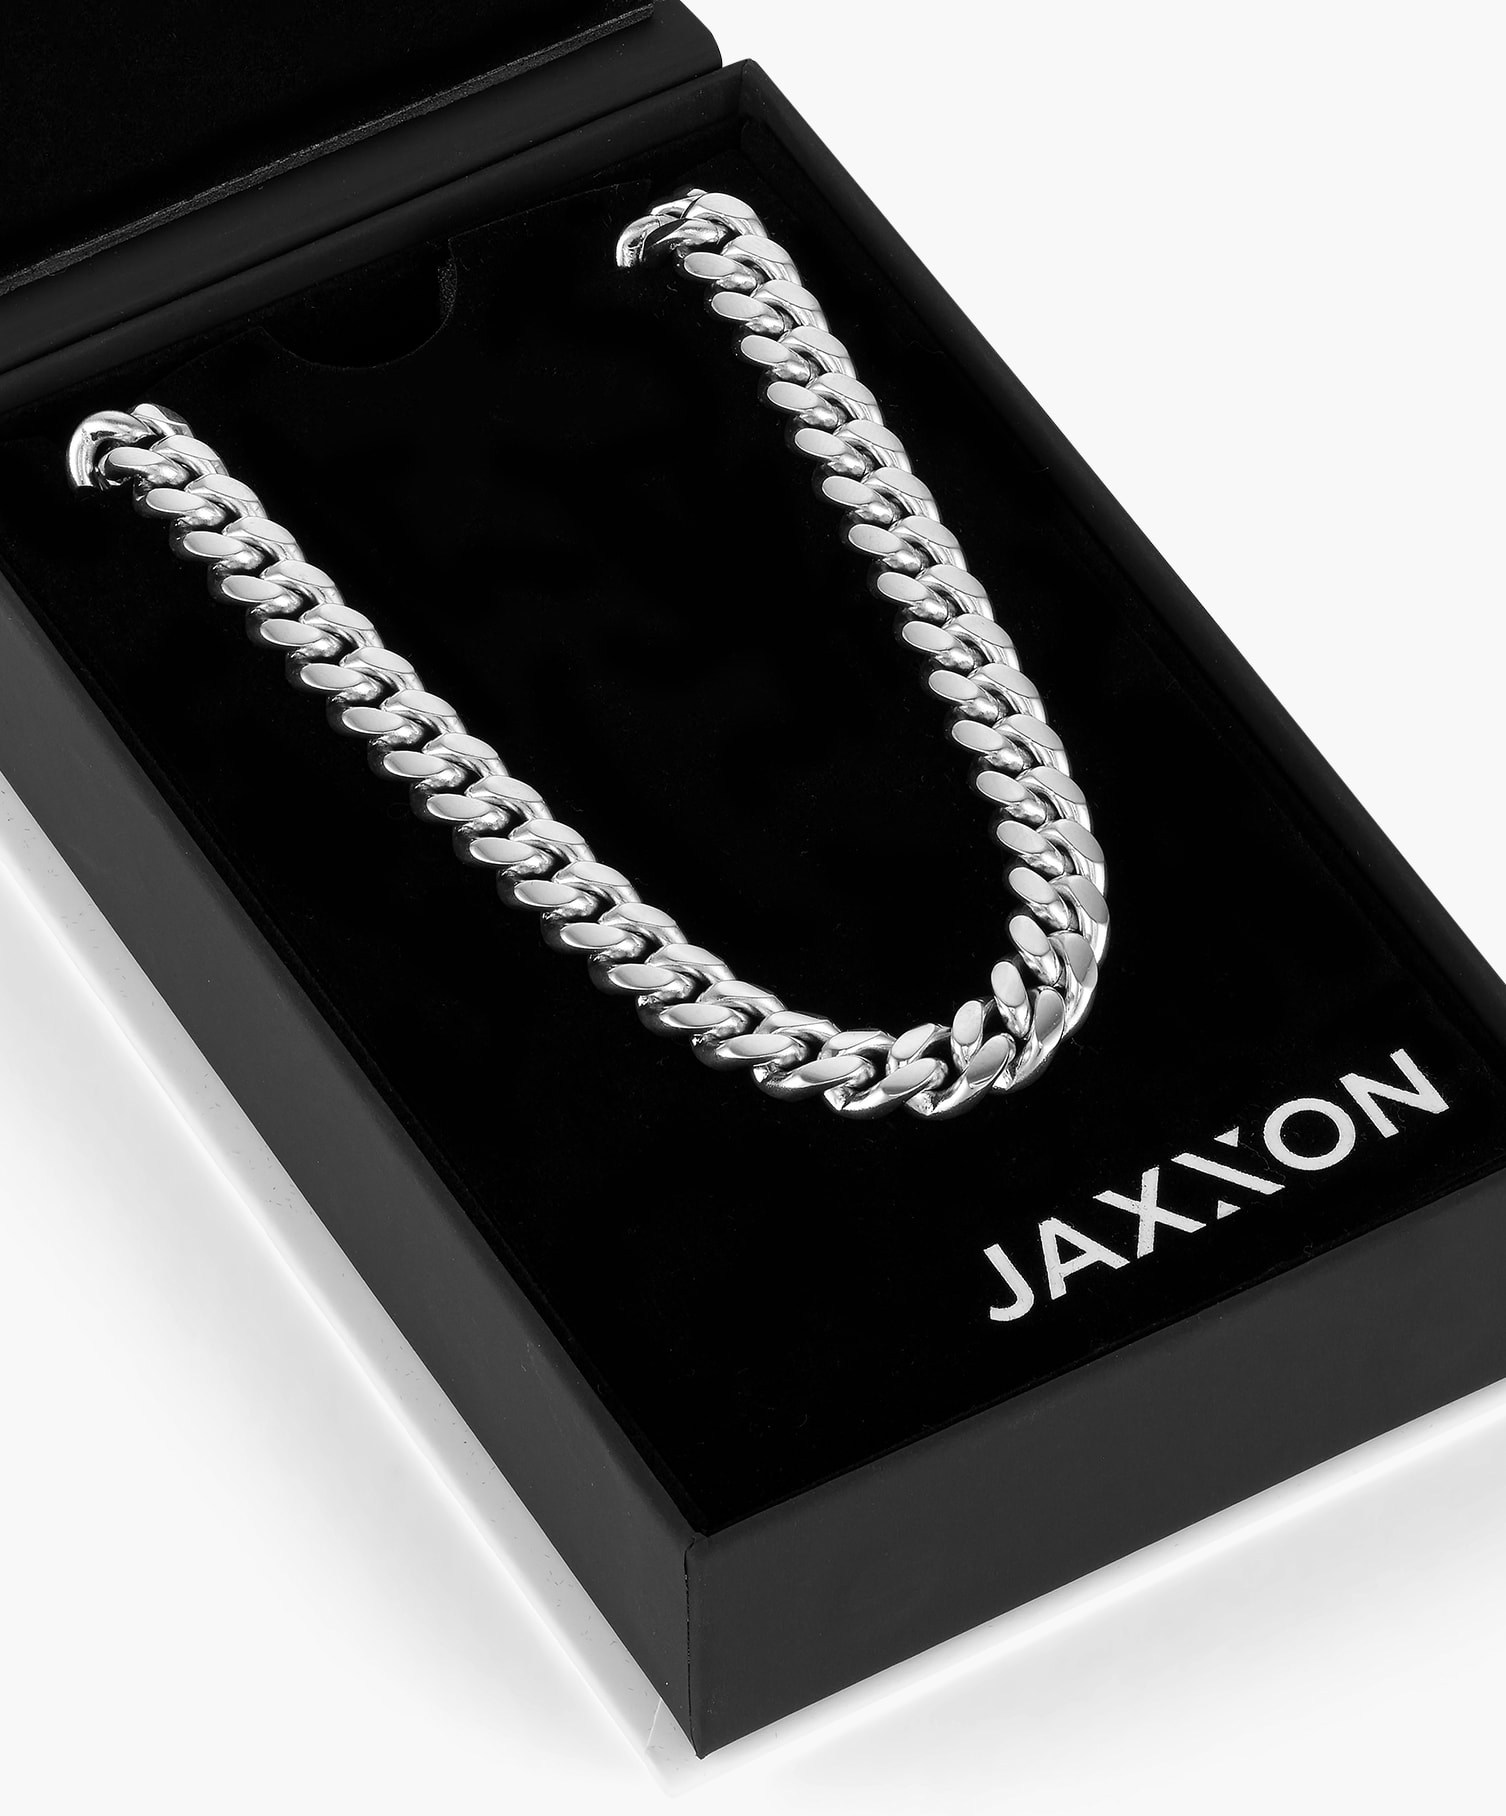 Image Cuban Link Chain - 8mm Silver - Higher Quality Standards